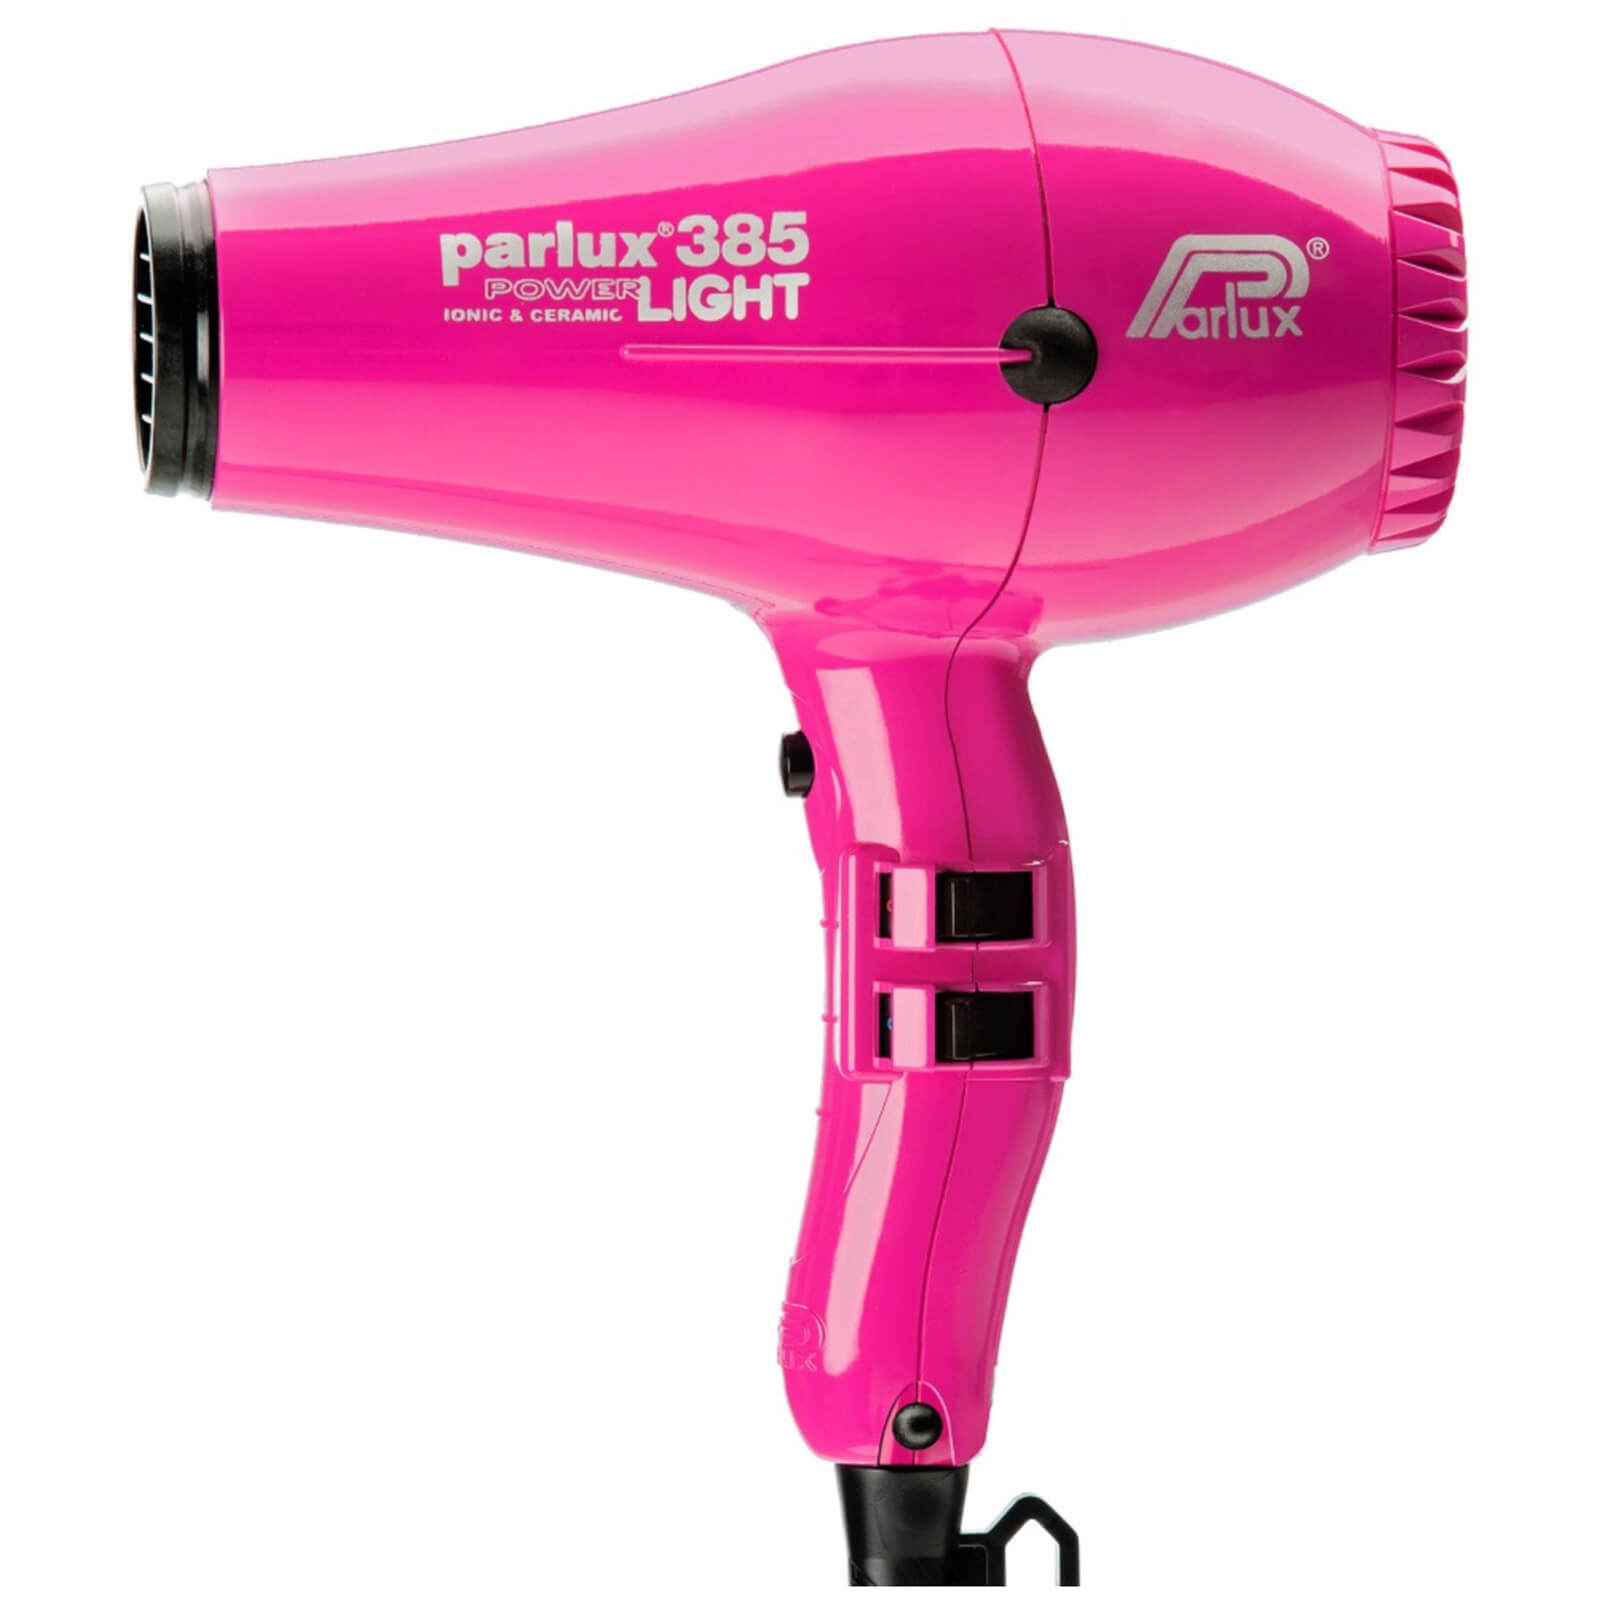 Parlux 385 Power Light Hair Dryer 2150W (Various Shades) - Pink